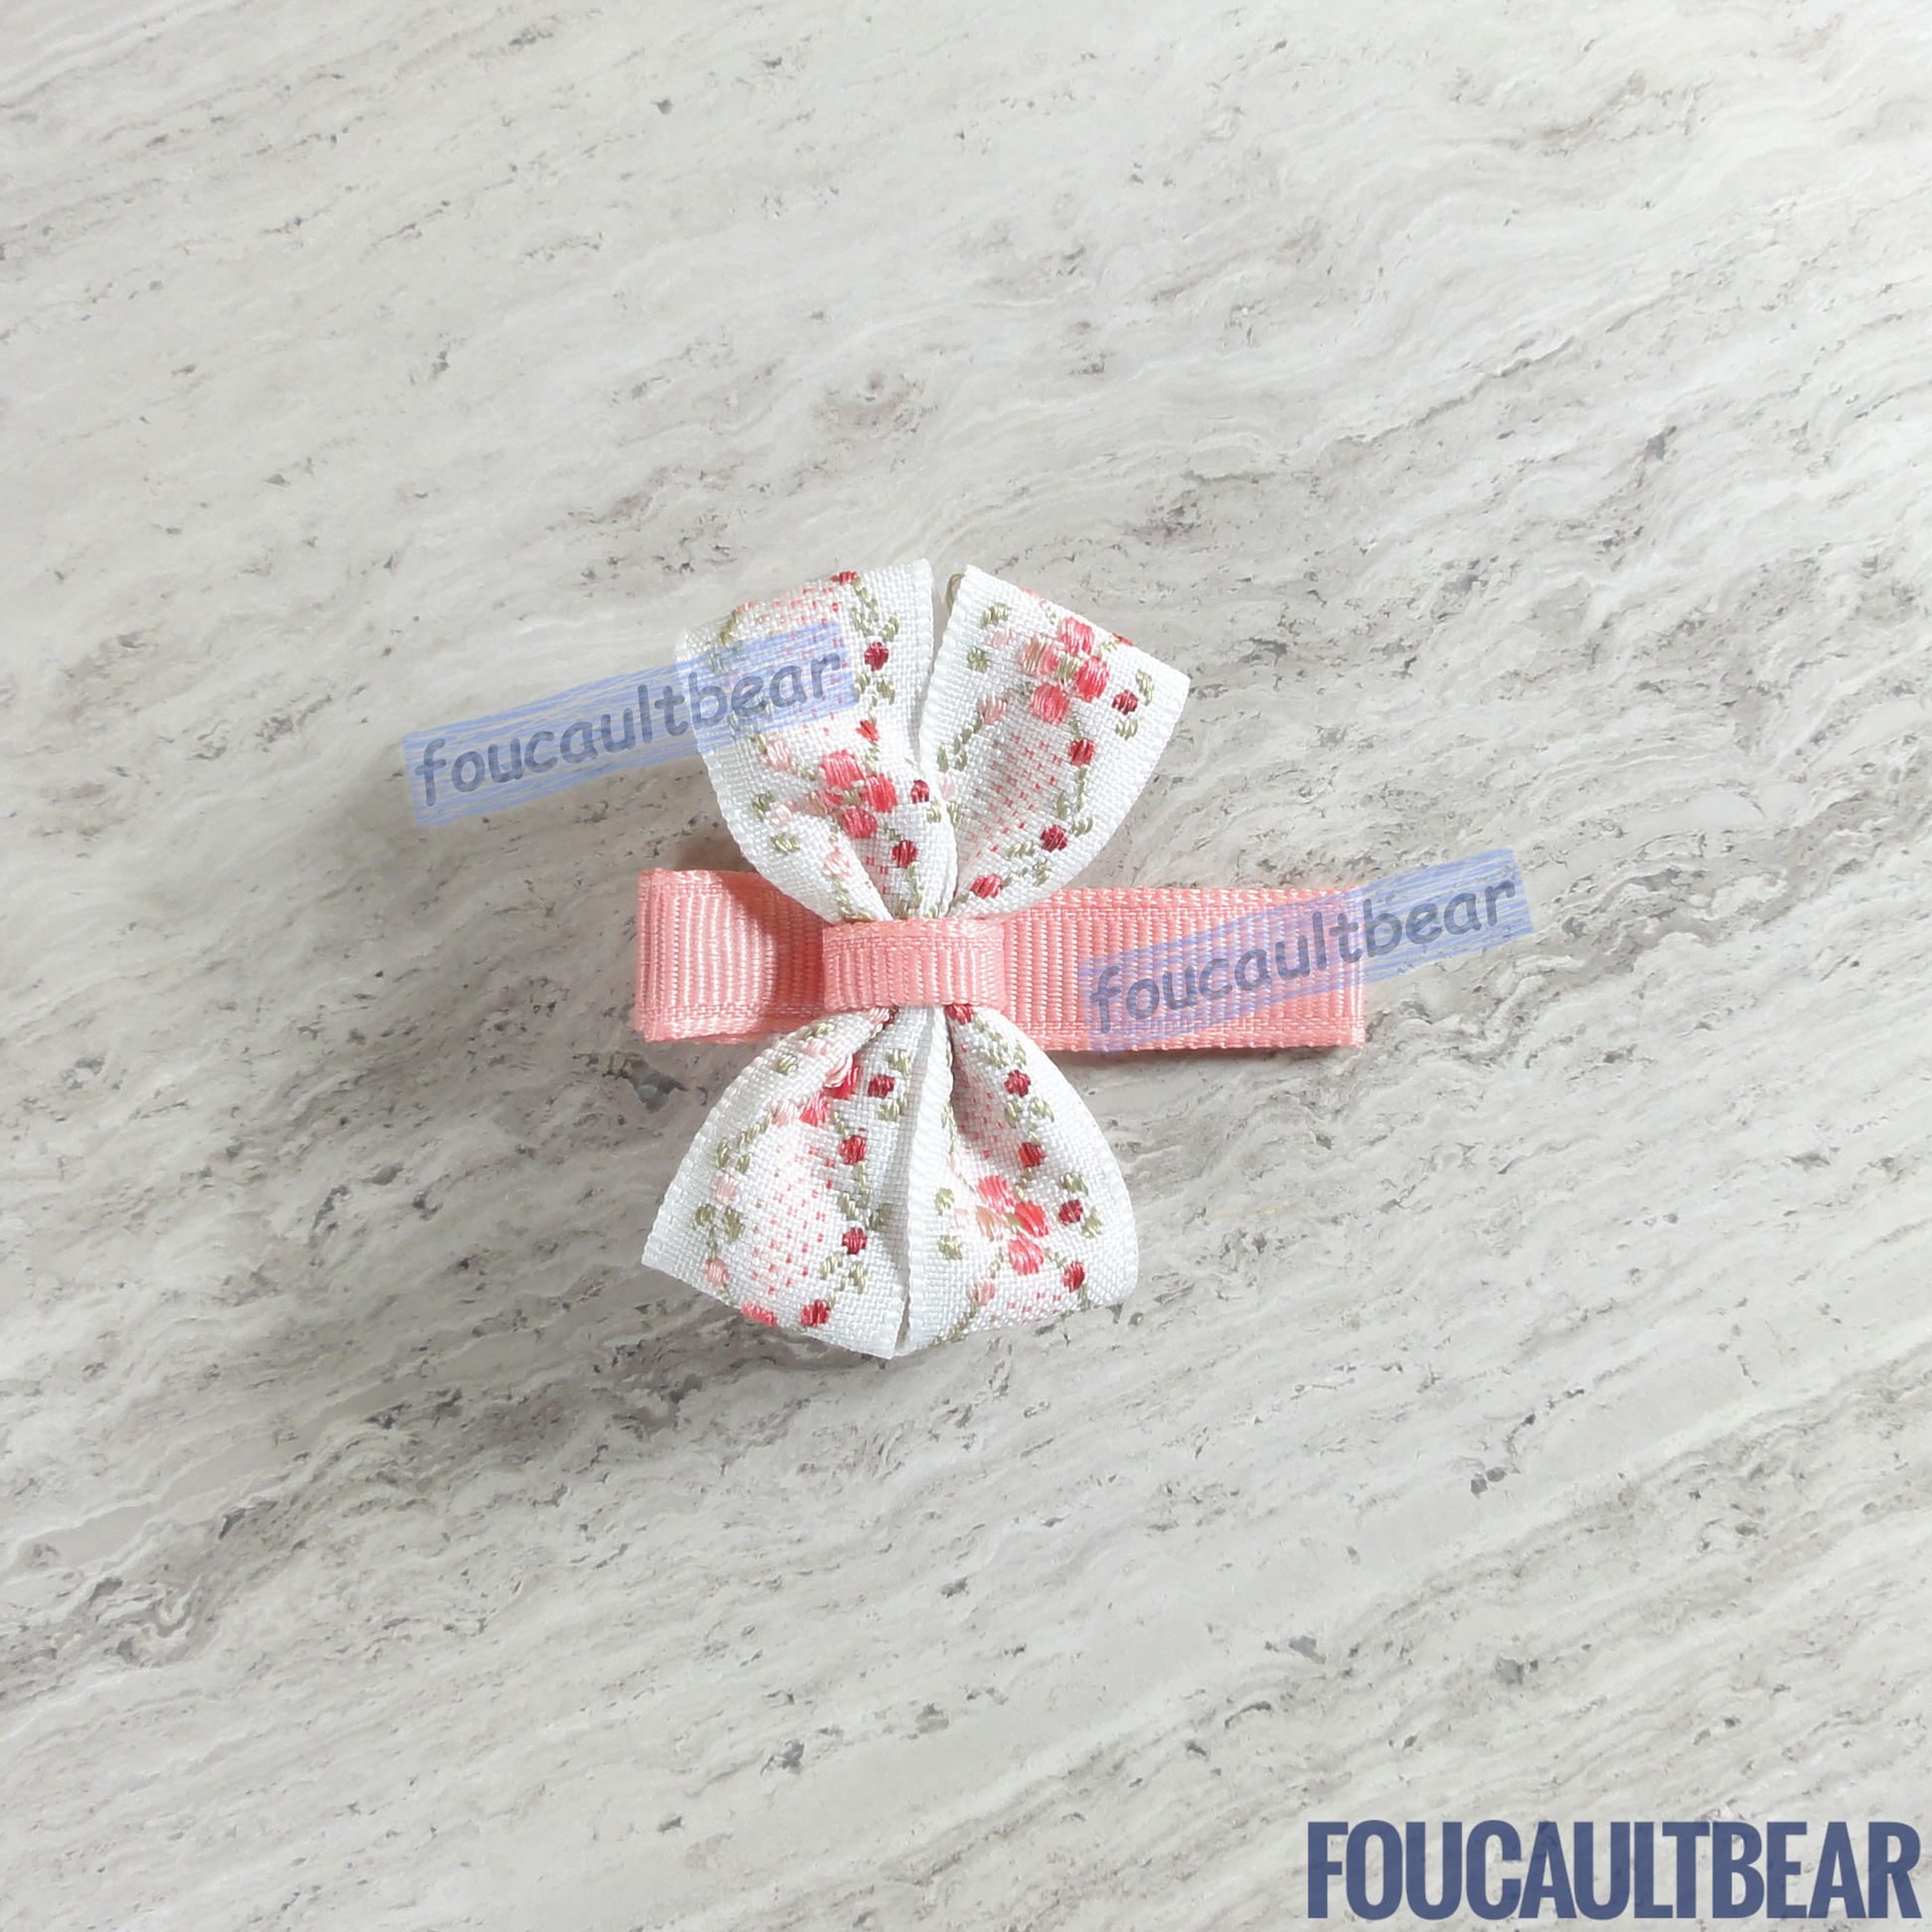 Foucaultbear's HANDMADE HAIR CLIPPIE. Garland Rose Bud. Jacquard Ribbon. Partially Lined Alligator Hair Clip. Garland Rose Bud, a beautiful flower Jacquard Ribbon Hair Bow Clippie. A nice addition to your little girl's wardrobe. Perfect for toddlers, preschoolers, elementary-schoolers. Absolutely adorable on babies with enough hair to wear it too. Makes for a great Baby Shower gift. Definitely not your standard cliché shower gift. 